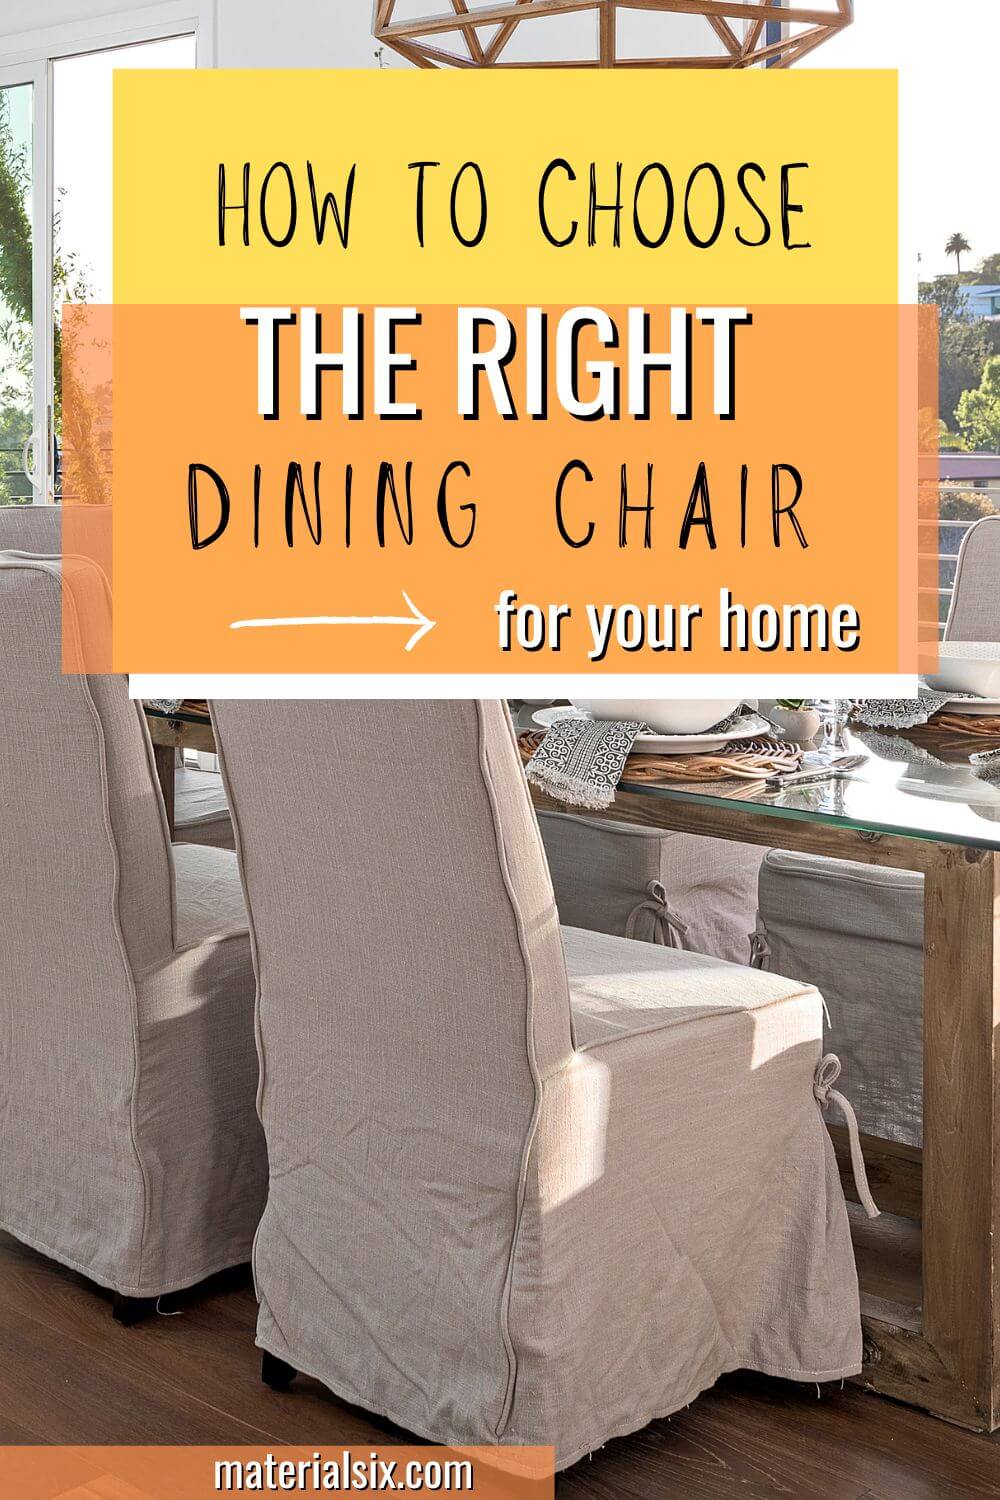 how to choose the right dining table for your home